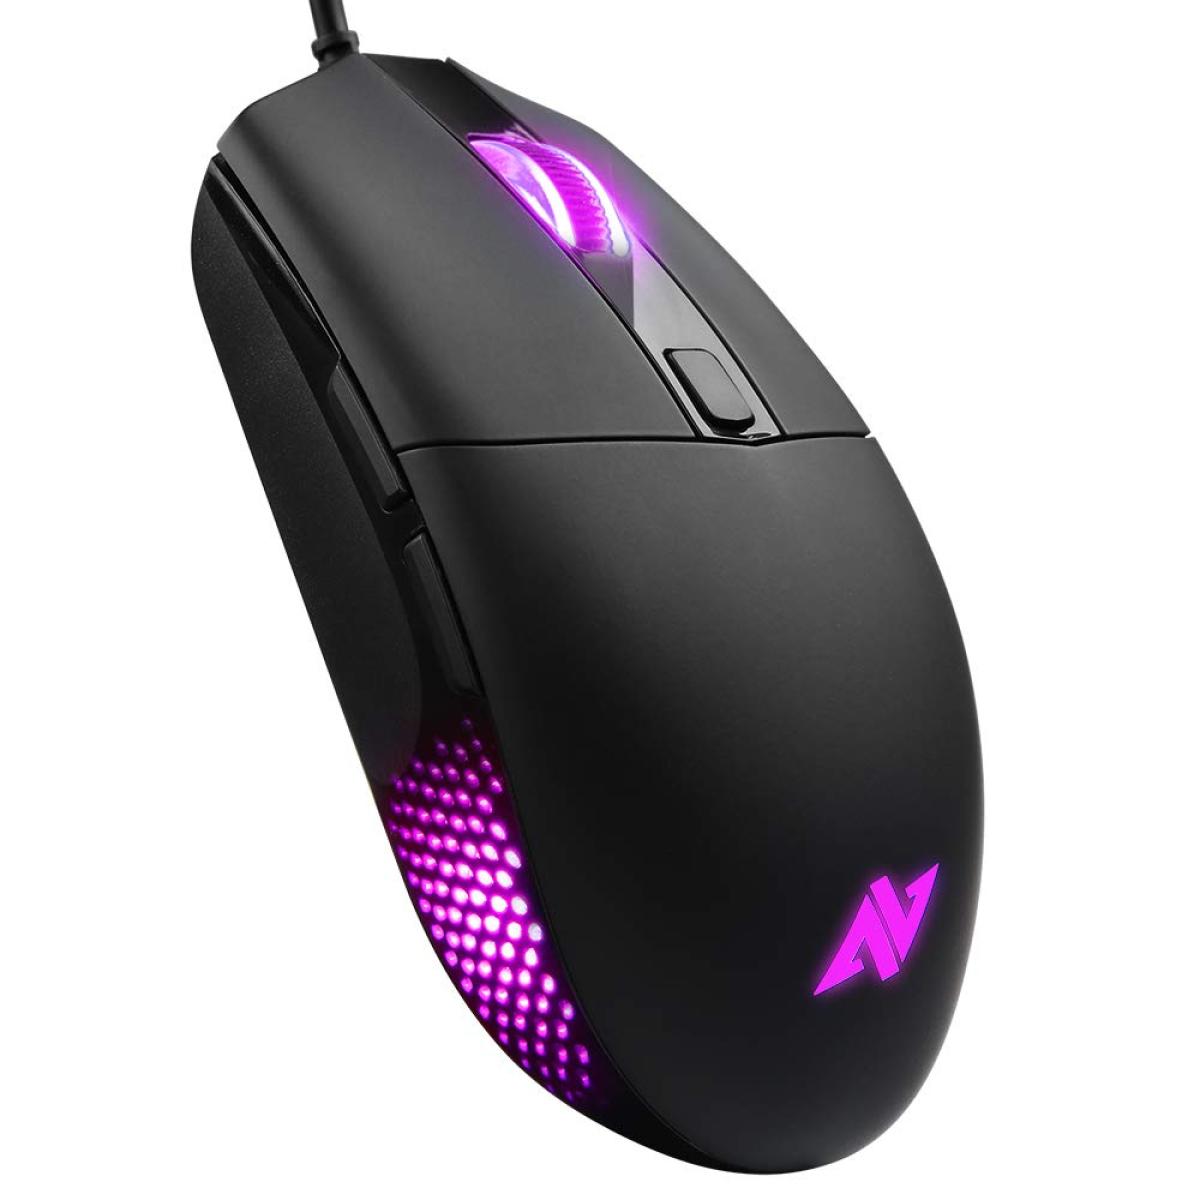 ABKONCORE A660 PROFESSIONAL RGB 10,000 DPI - GAMING MOUSE